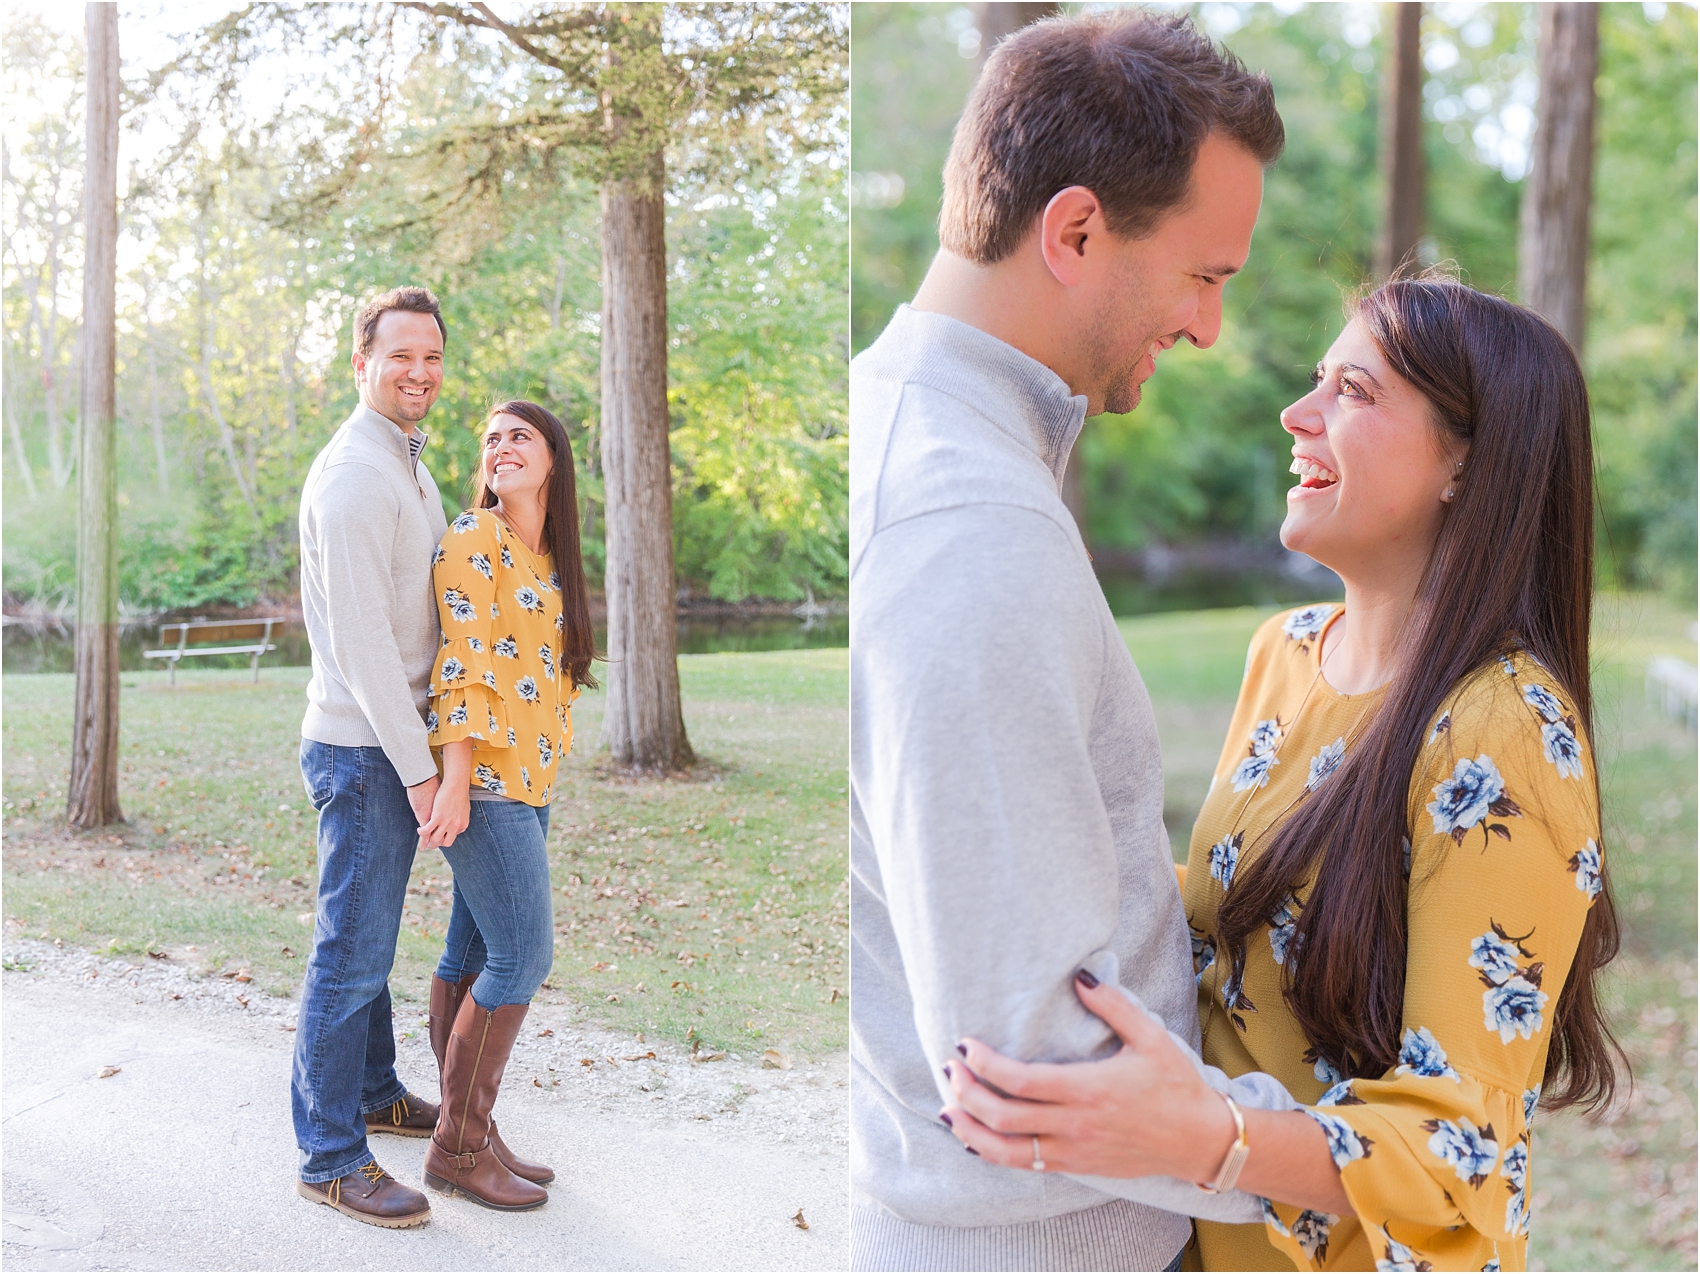 relaxed-autumn-engagement-photos-at-hudson-mills-metropark-in-dexter-mi-by-courtney-carolyn-photography_0024.jpg